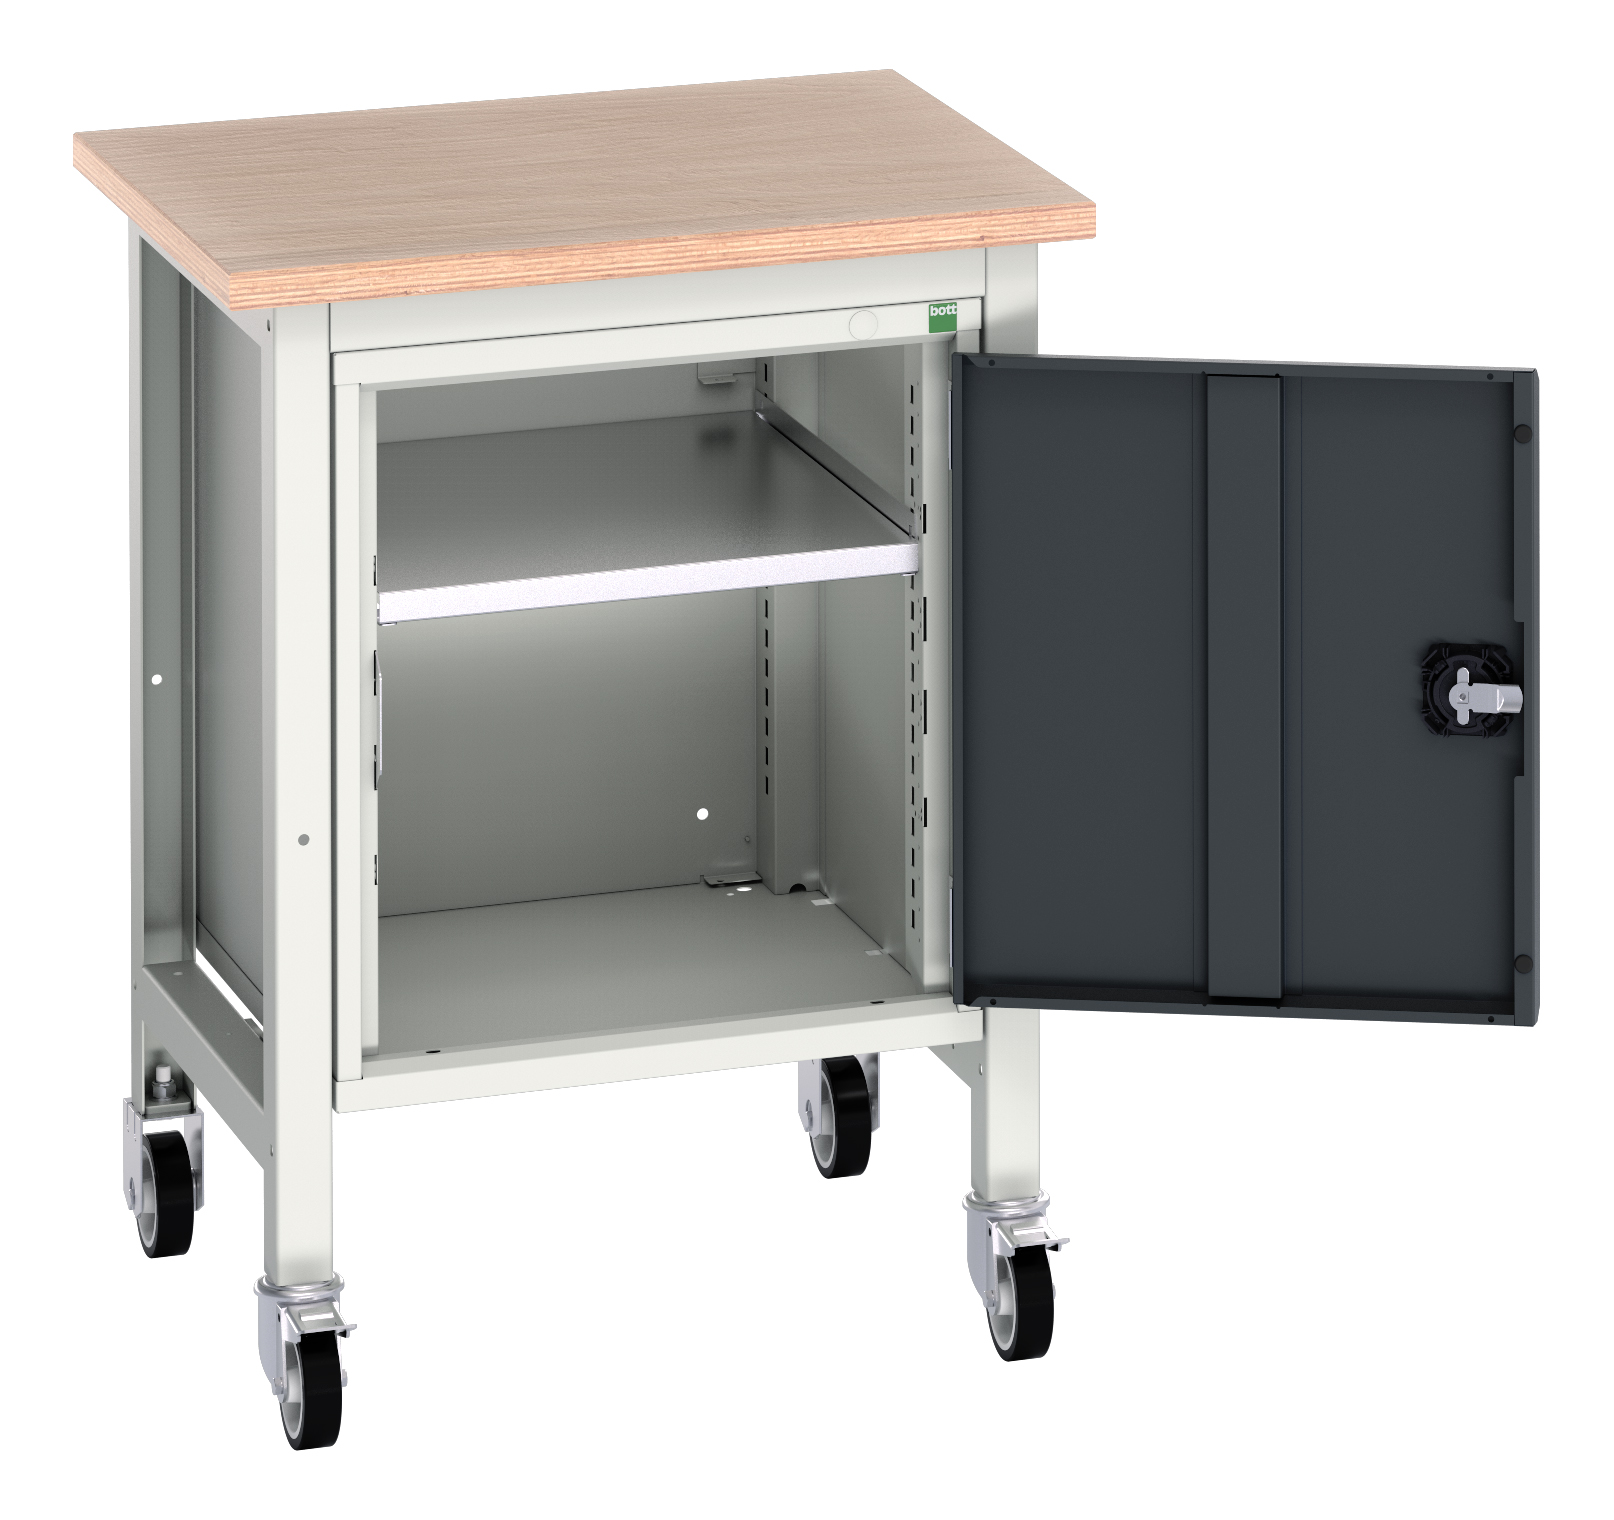 Bott Verso Mobile Workstand With Full Cupboard - 16922202.19